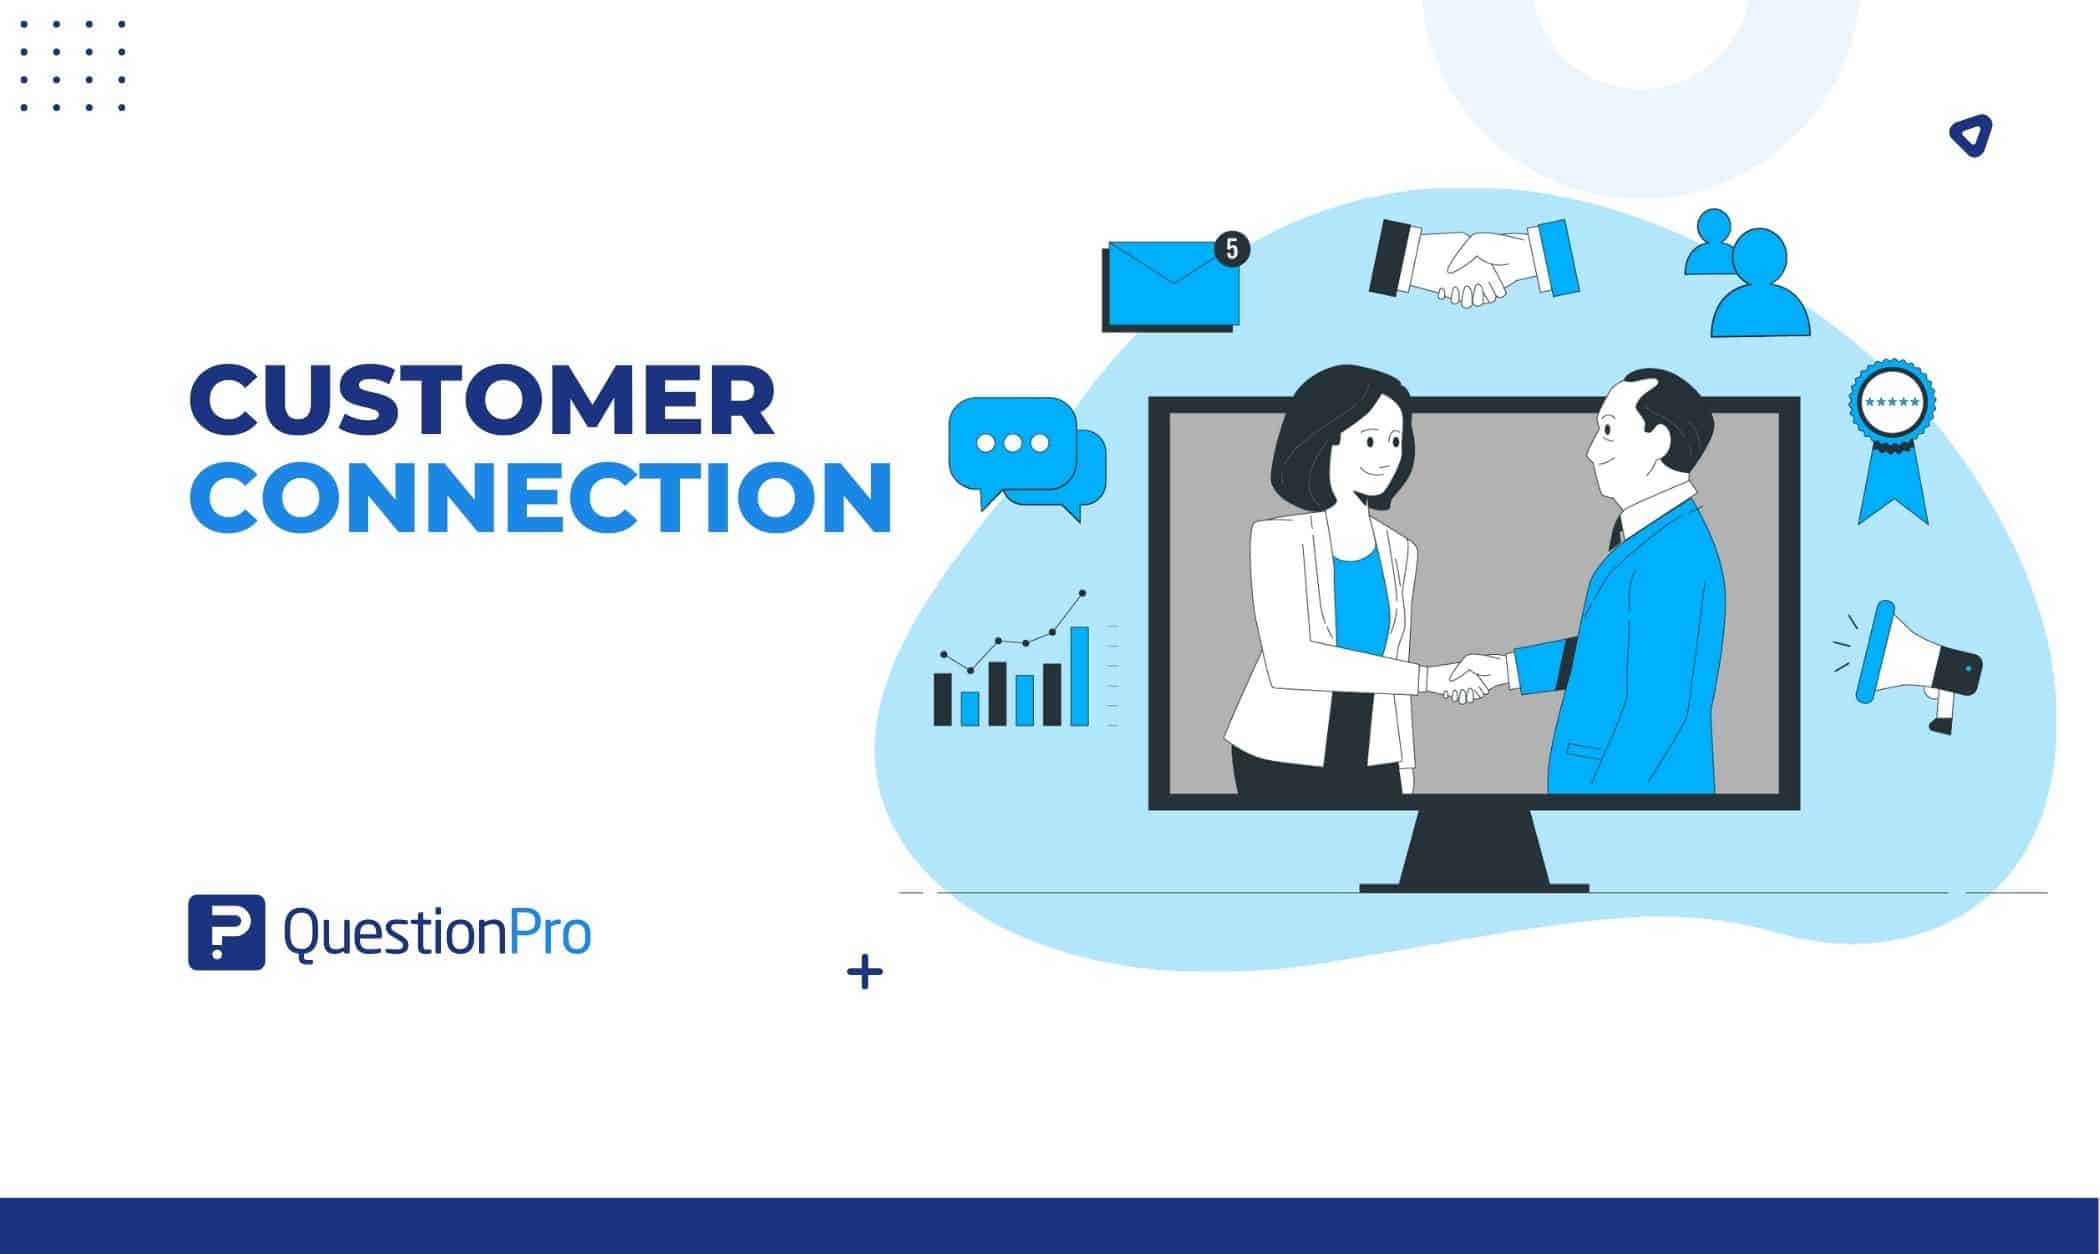 Customer connection lets you build strong relationships with customers. Follow the practices to connect with them & establish brand loyalty.